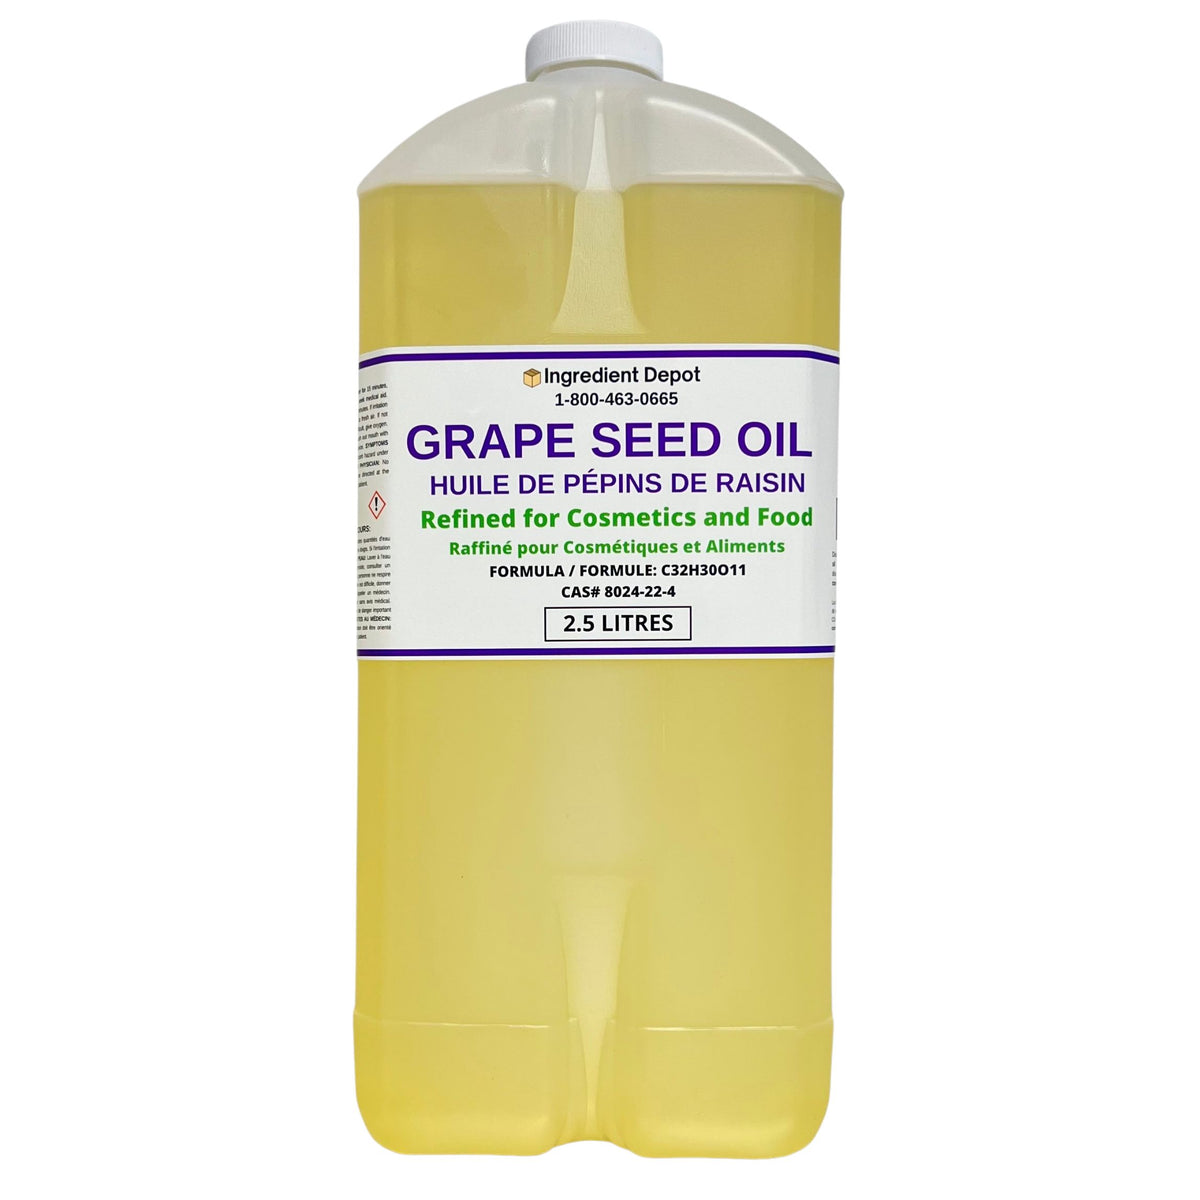 Grape Seed Oil (Refined) 2.5 litres